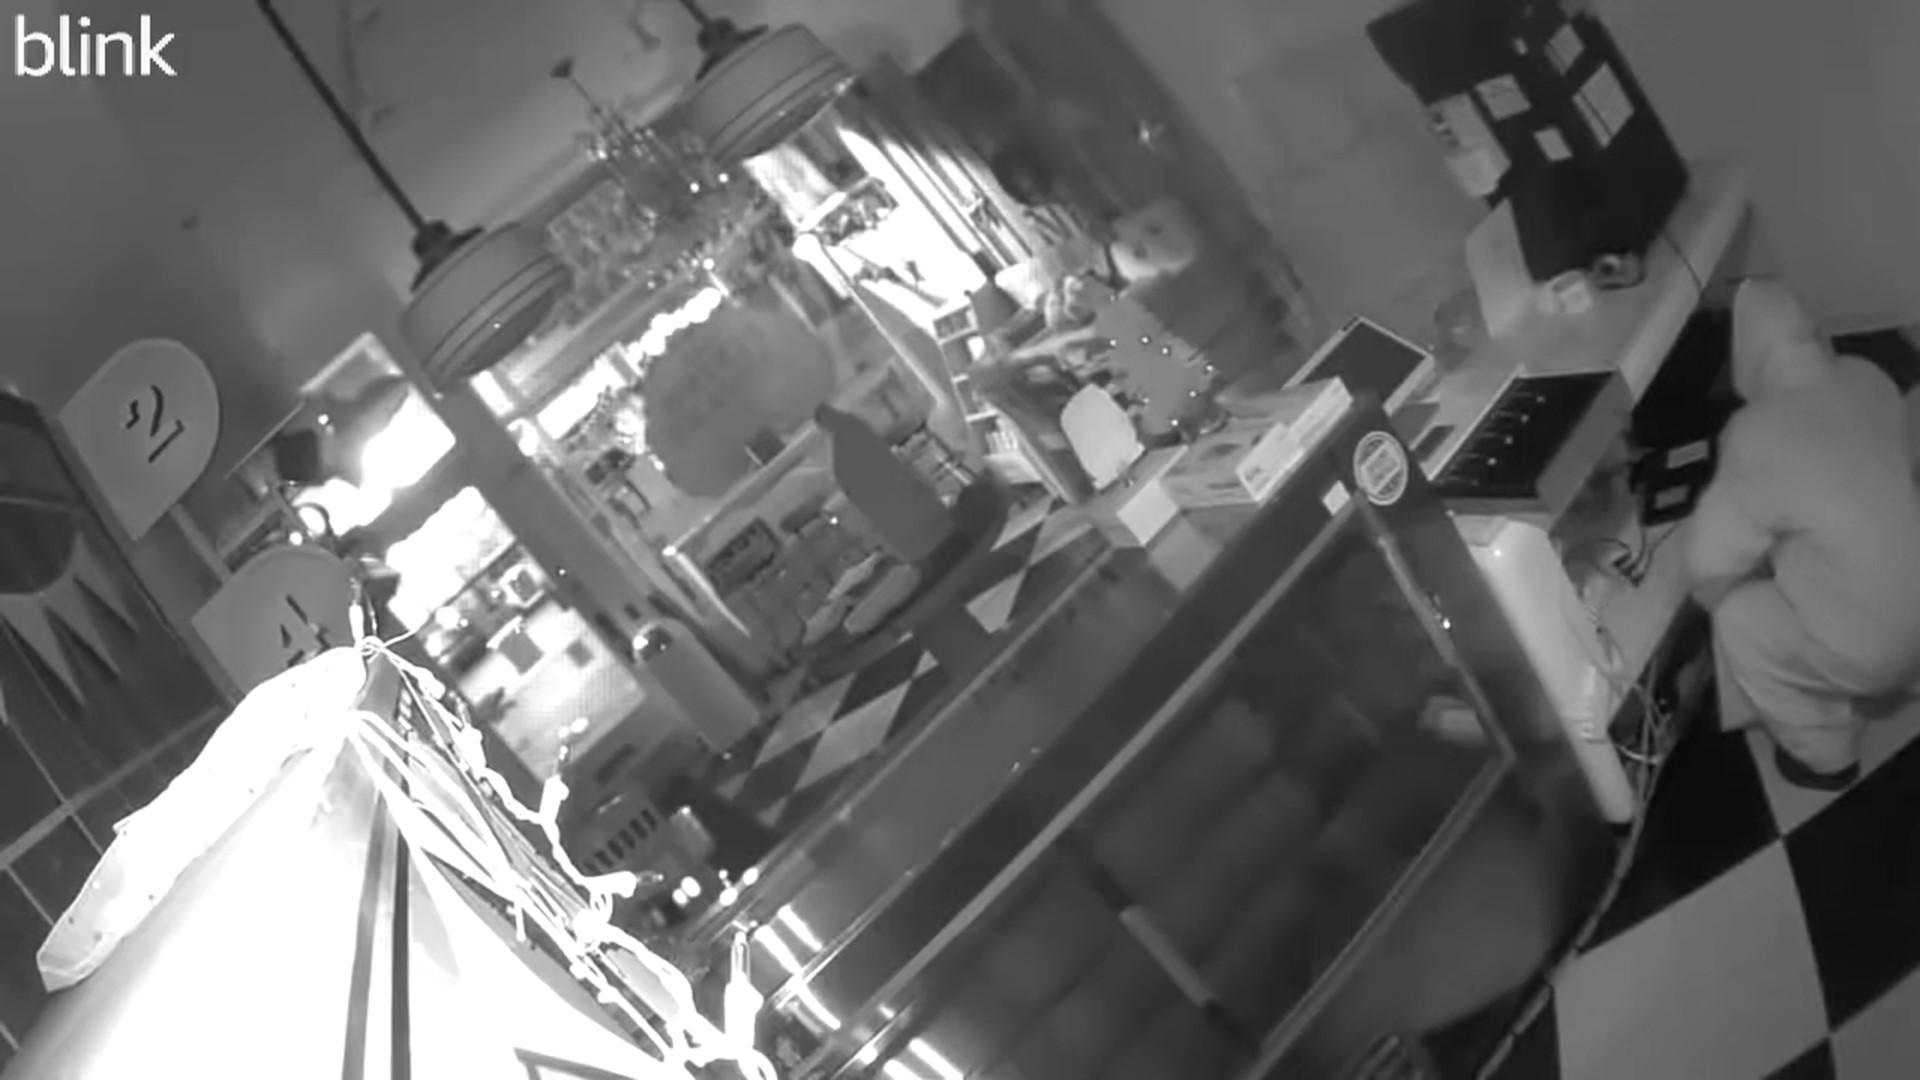 Video shows a break-in at the Flying Cupcake.